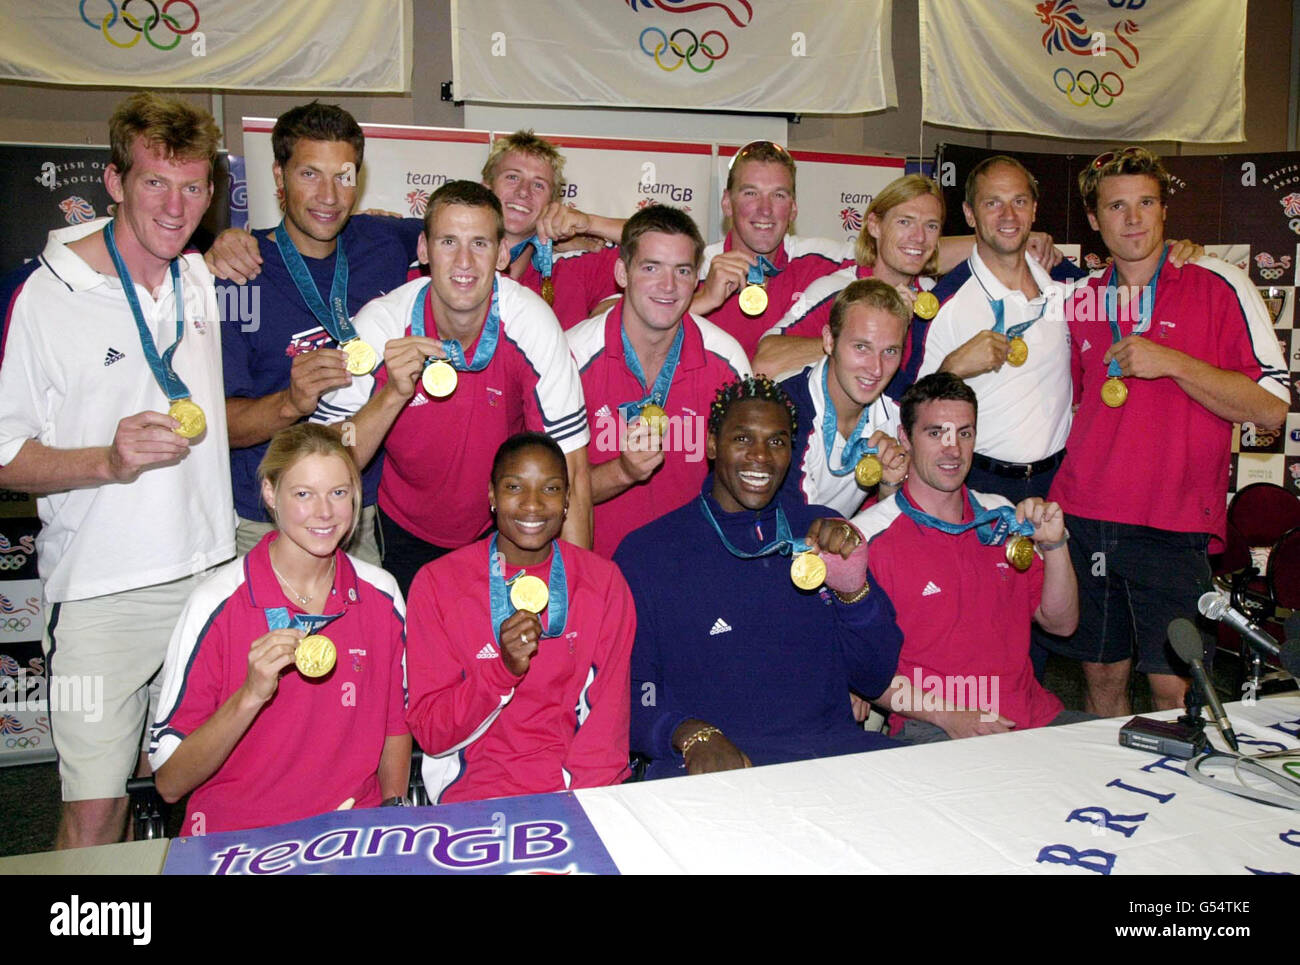 The British Olympic Chmpions show off their gold medals during a news conference at London's Heathrow Airport when they returned from Sydney with other members ofthe Olympic team. *Olympic Gold Medallists: Back Row, Steve Trapmore (Eights), Rowley Douglas (Eights), Ben Hunt-Davies (Eights), Matthew Pinsent (Coxless Four), Tim Foster (Coxless Four), Steve Redgrave (Coxless Four), James Cracknell (Coxless Four). Middle Row: Simon Dennis (Eights), Luka Grubor (Eights), Andrew Lindsay (Eights). Front Row: Stephanie Cook (Pentathlon), Denise Lewis (Heptathlon), Audley Harrison (Super-heavyweight Stock Photo